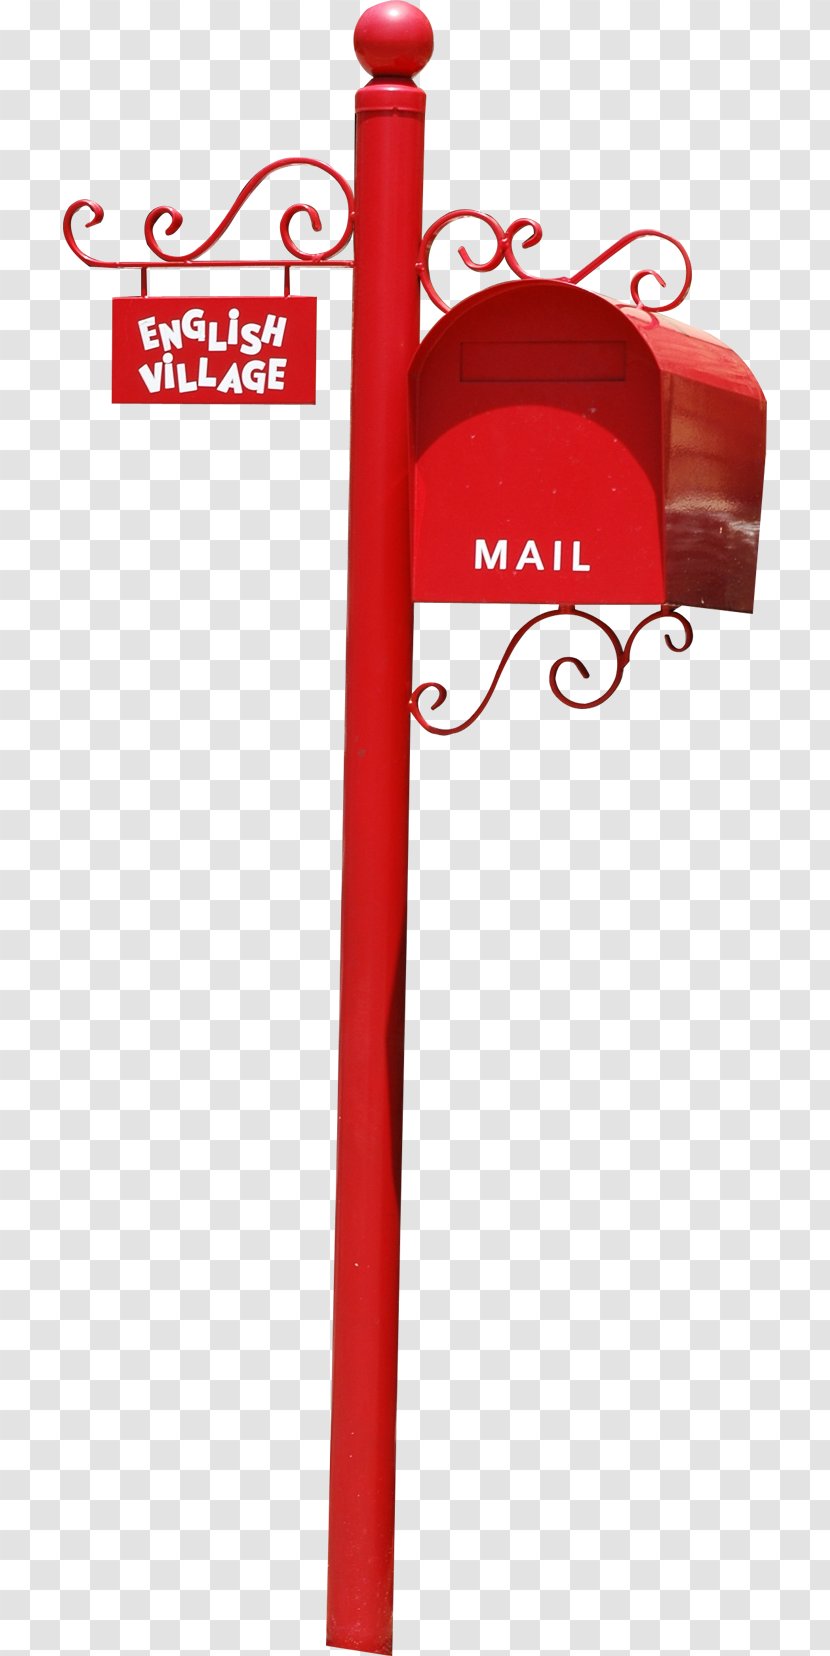 Download Letter Box - Video - Material Chinese Red Realistic Iron Mailbox Transparent PNG